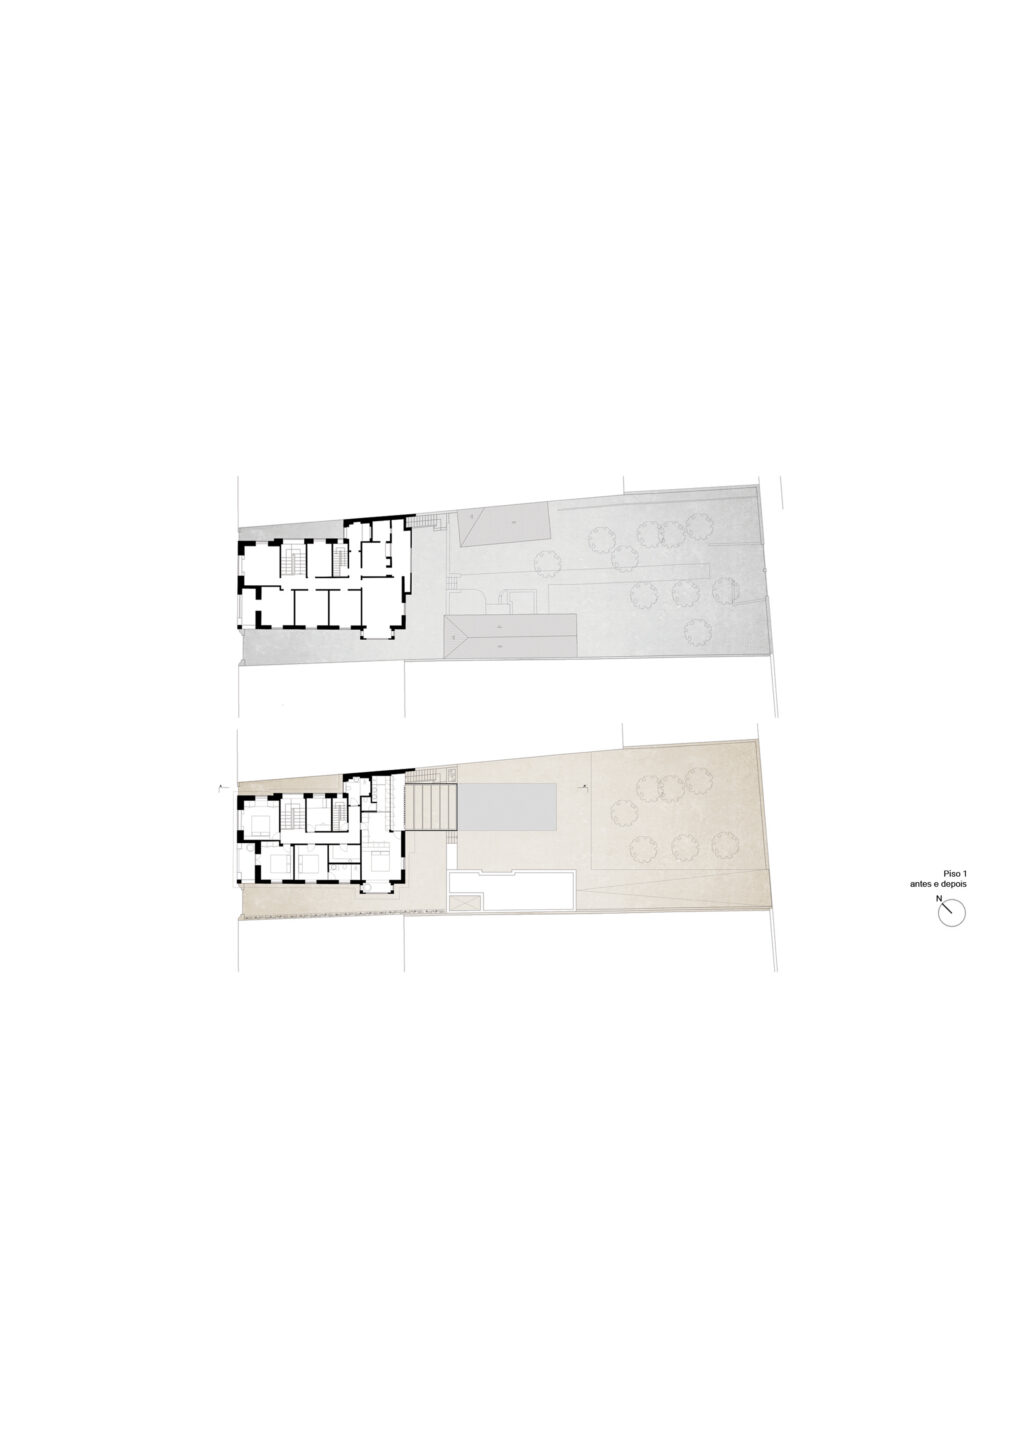 . Casa anos Frari Floor plan before and after